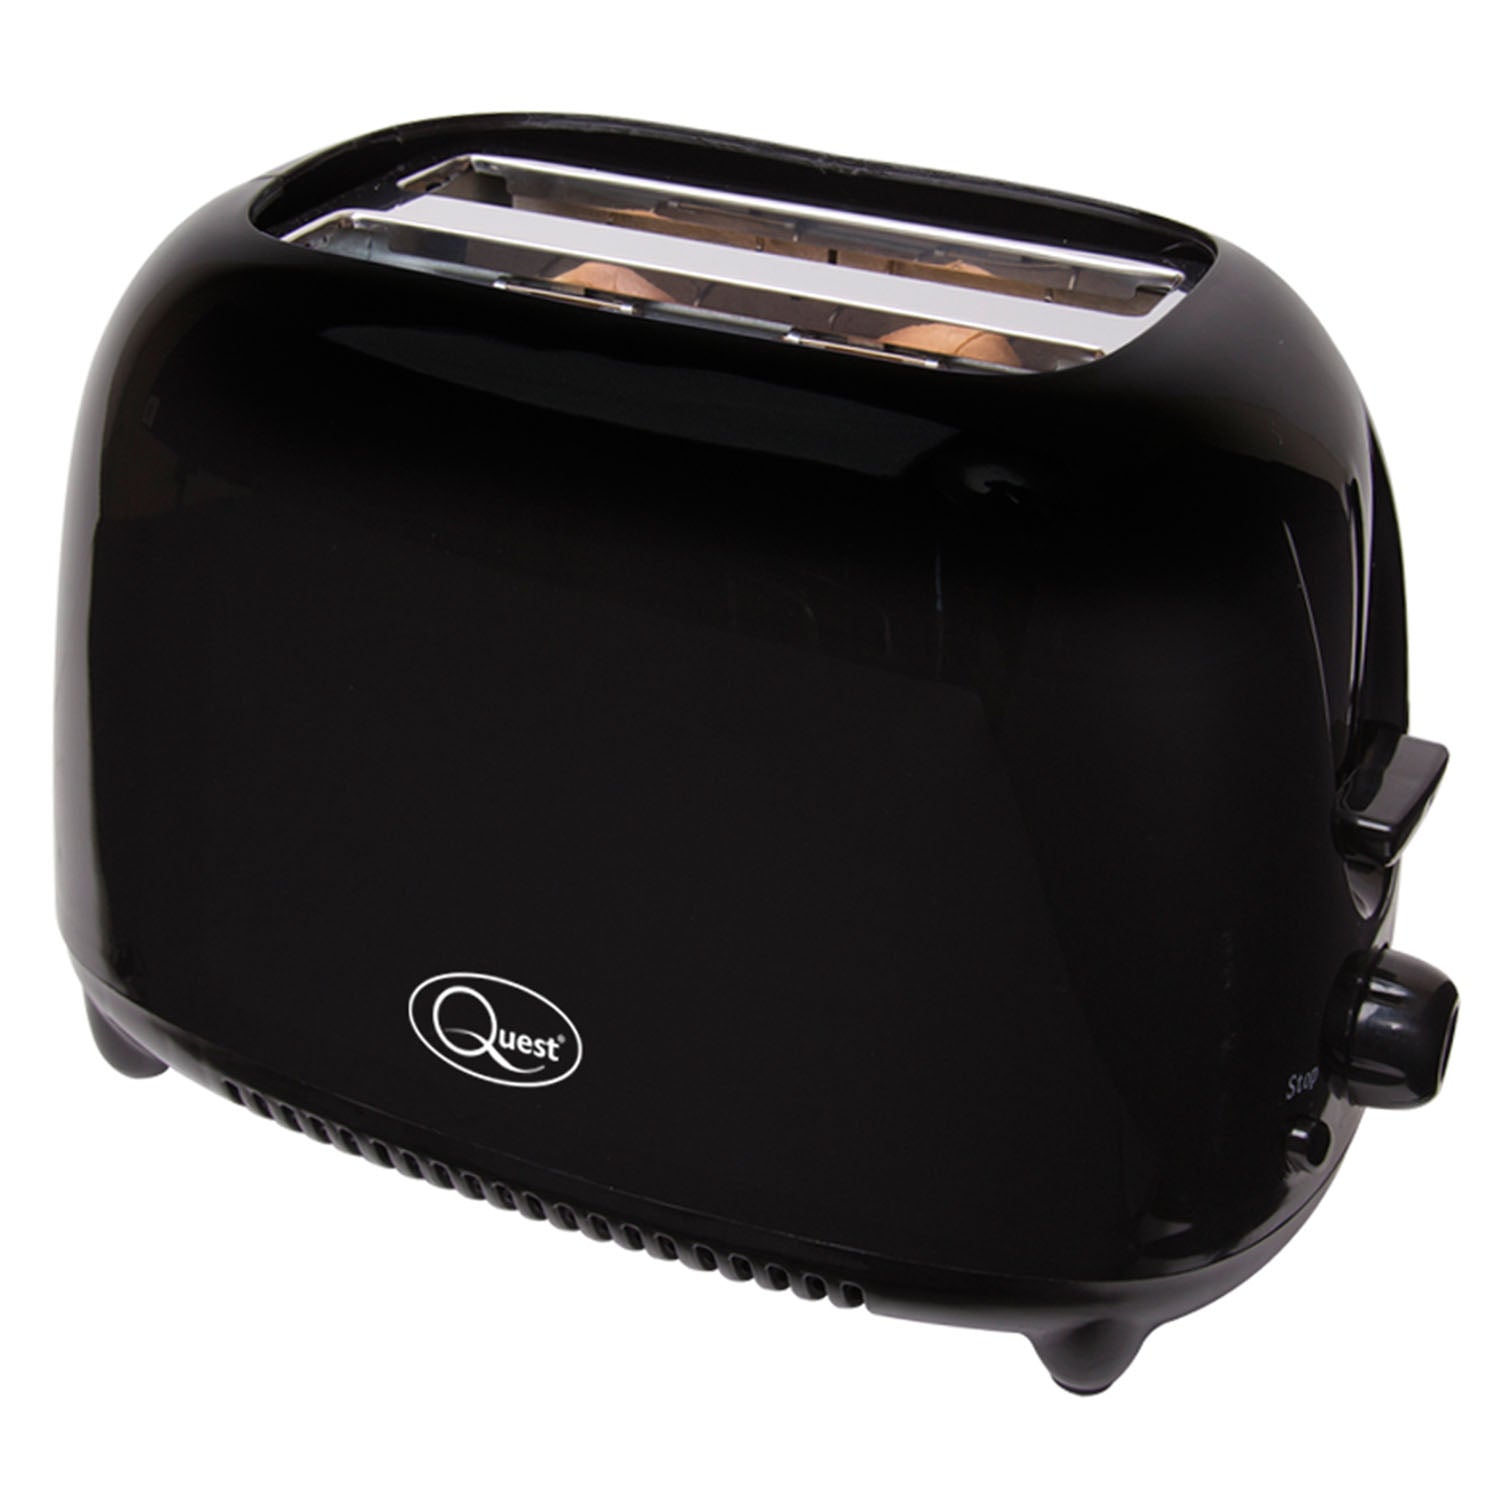 Quest 700W Black 2 Slice Compact Toaster